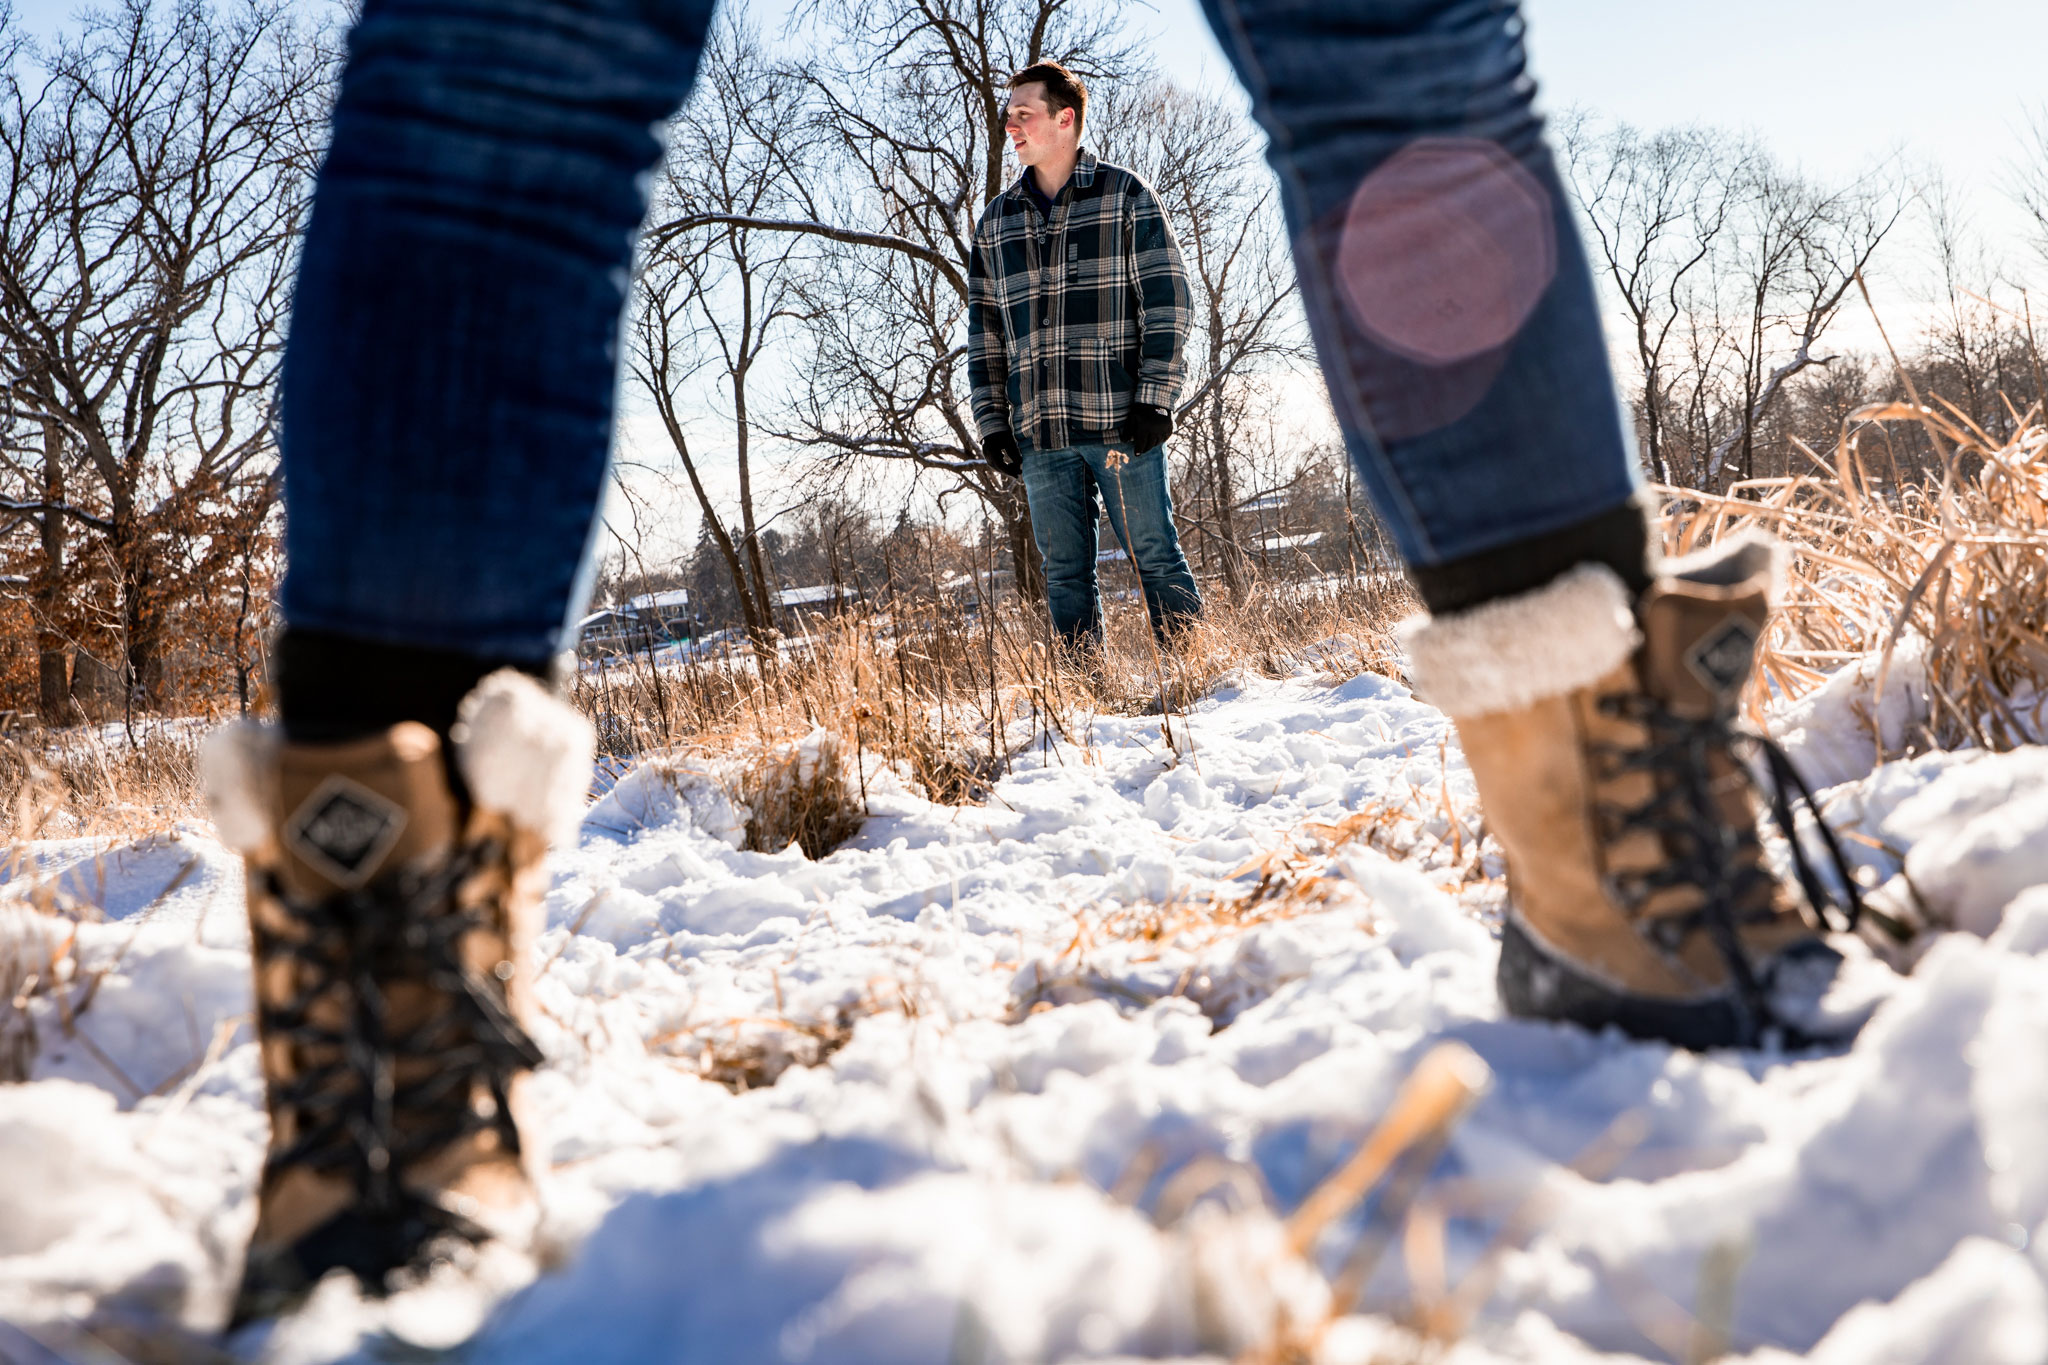 Silverwood winter engagement session